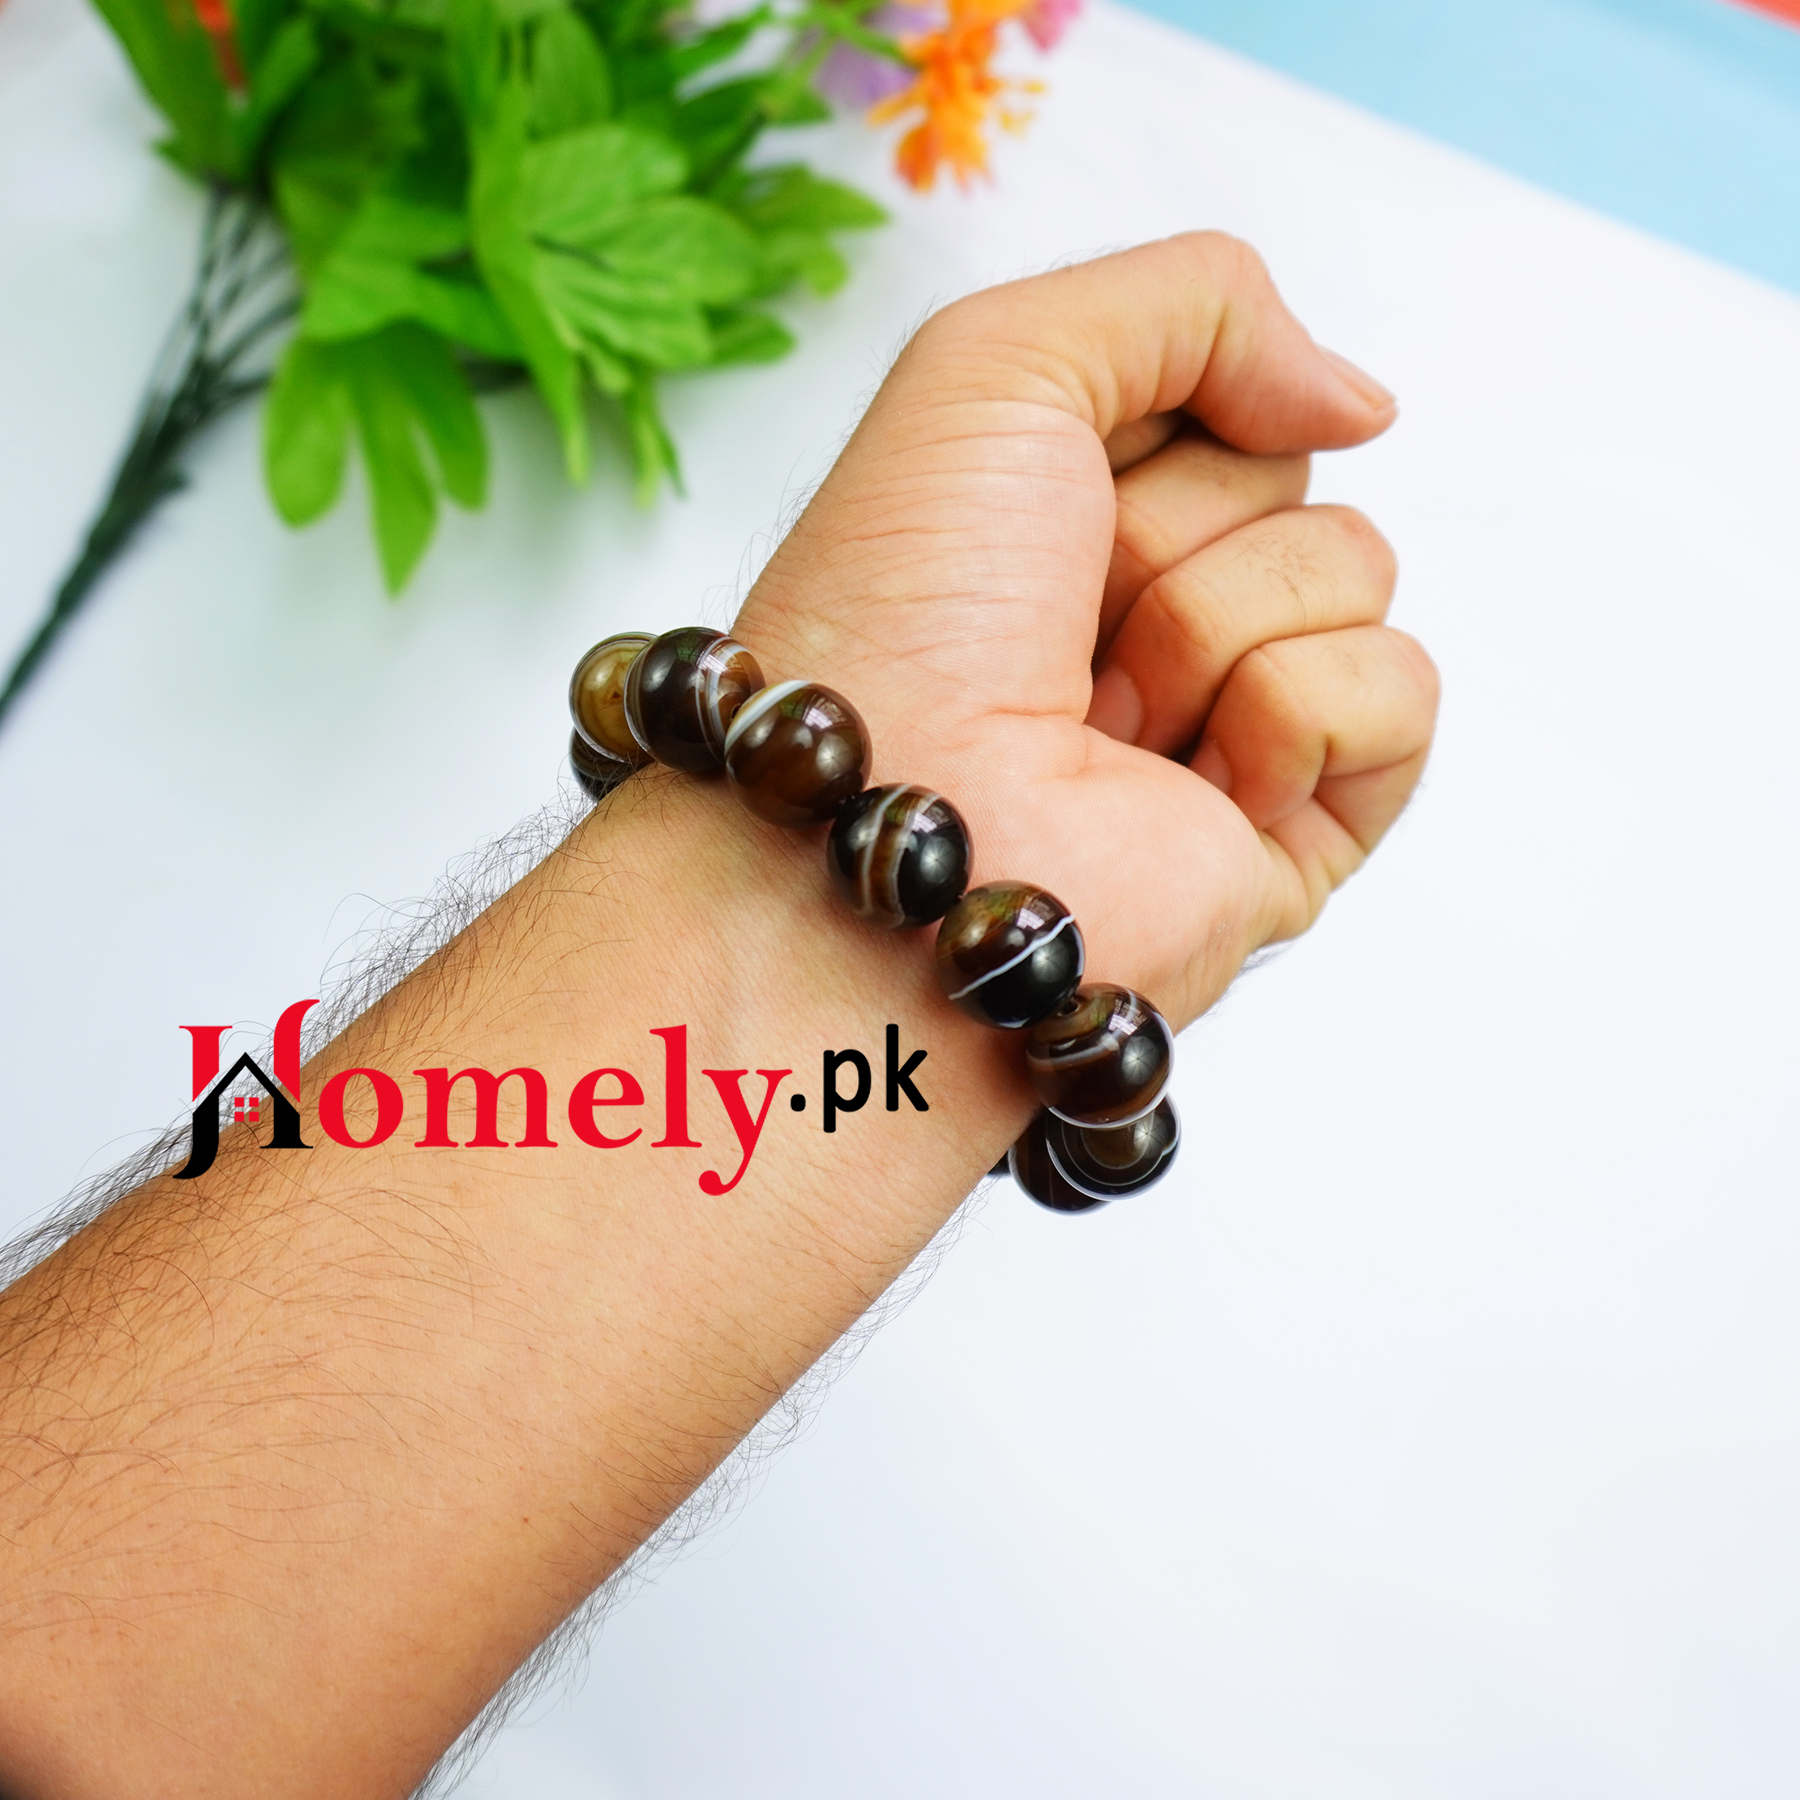 Buy KGN GEMS, BEAUTIFUL NATURAL PINK AQEEQ GEMSTONE BRACELET, PERFECT ROUND  BEADS, HANDMADE SMOOTH POLISHED, HEALING CHAKRA BALANCING BRACELET, FAITH  AND LOVE, FOR ALL, at Amazon.in